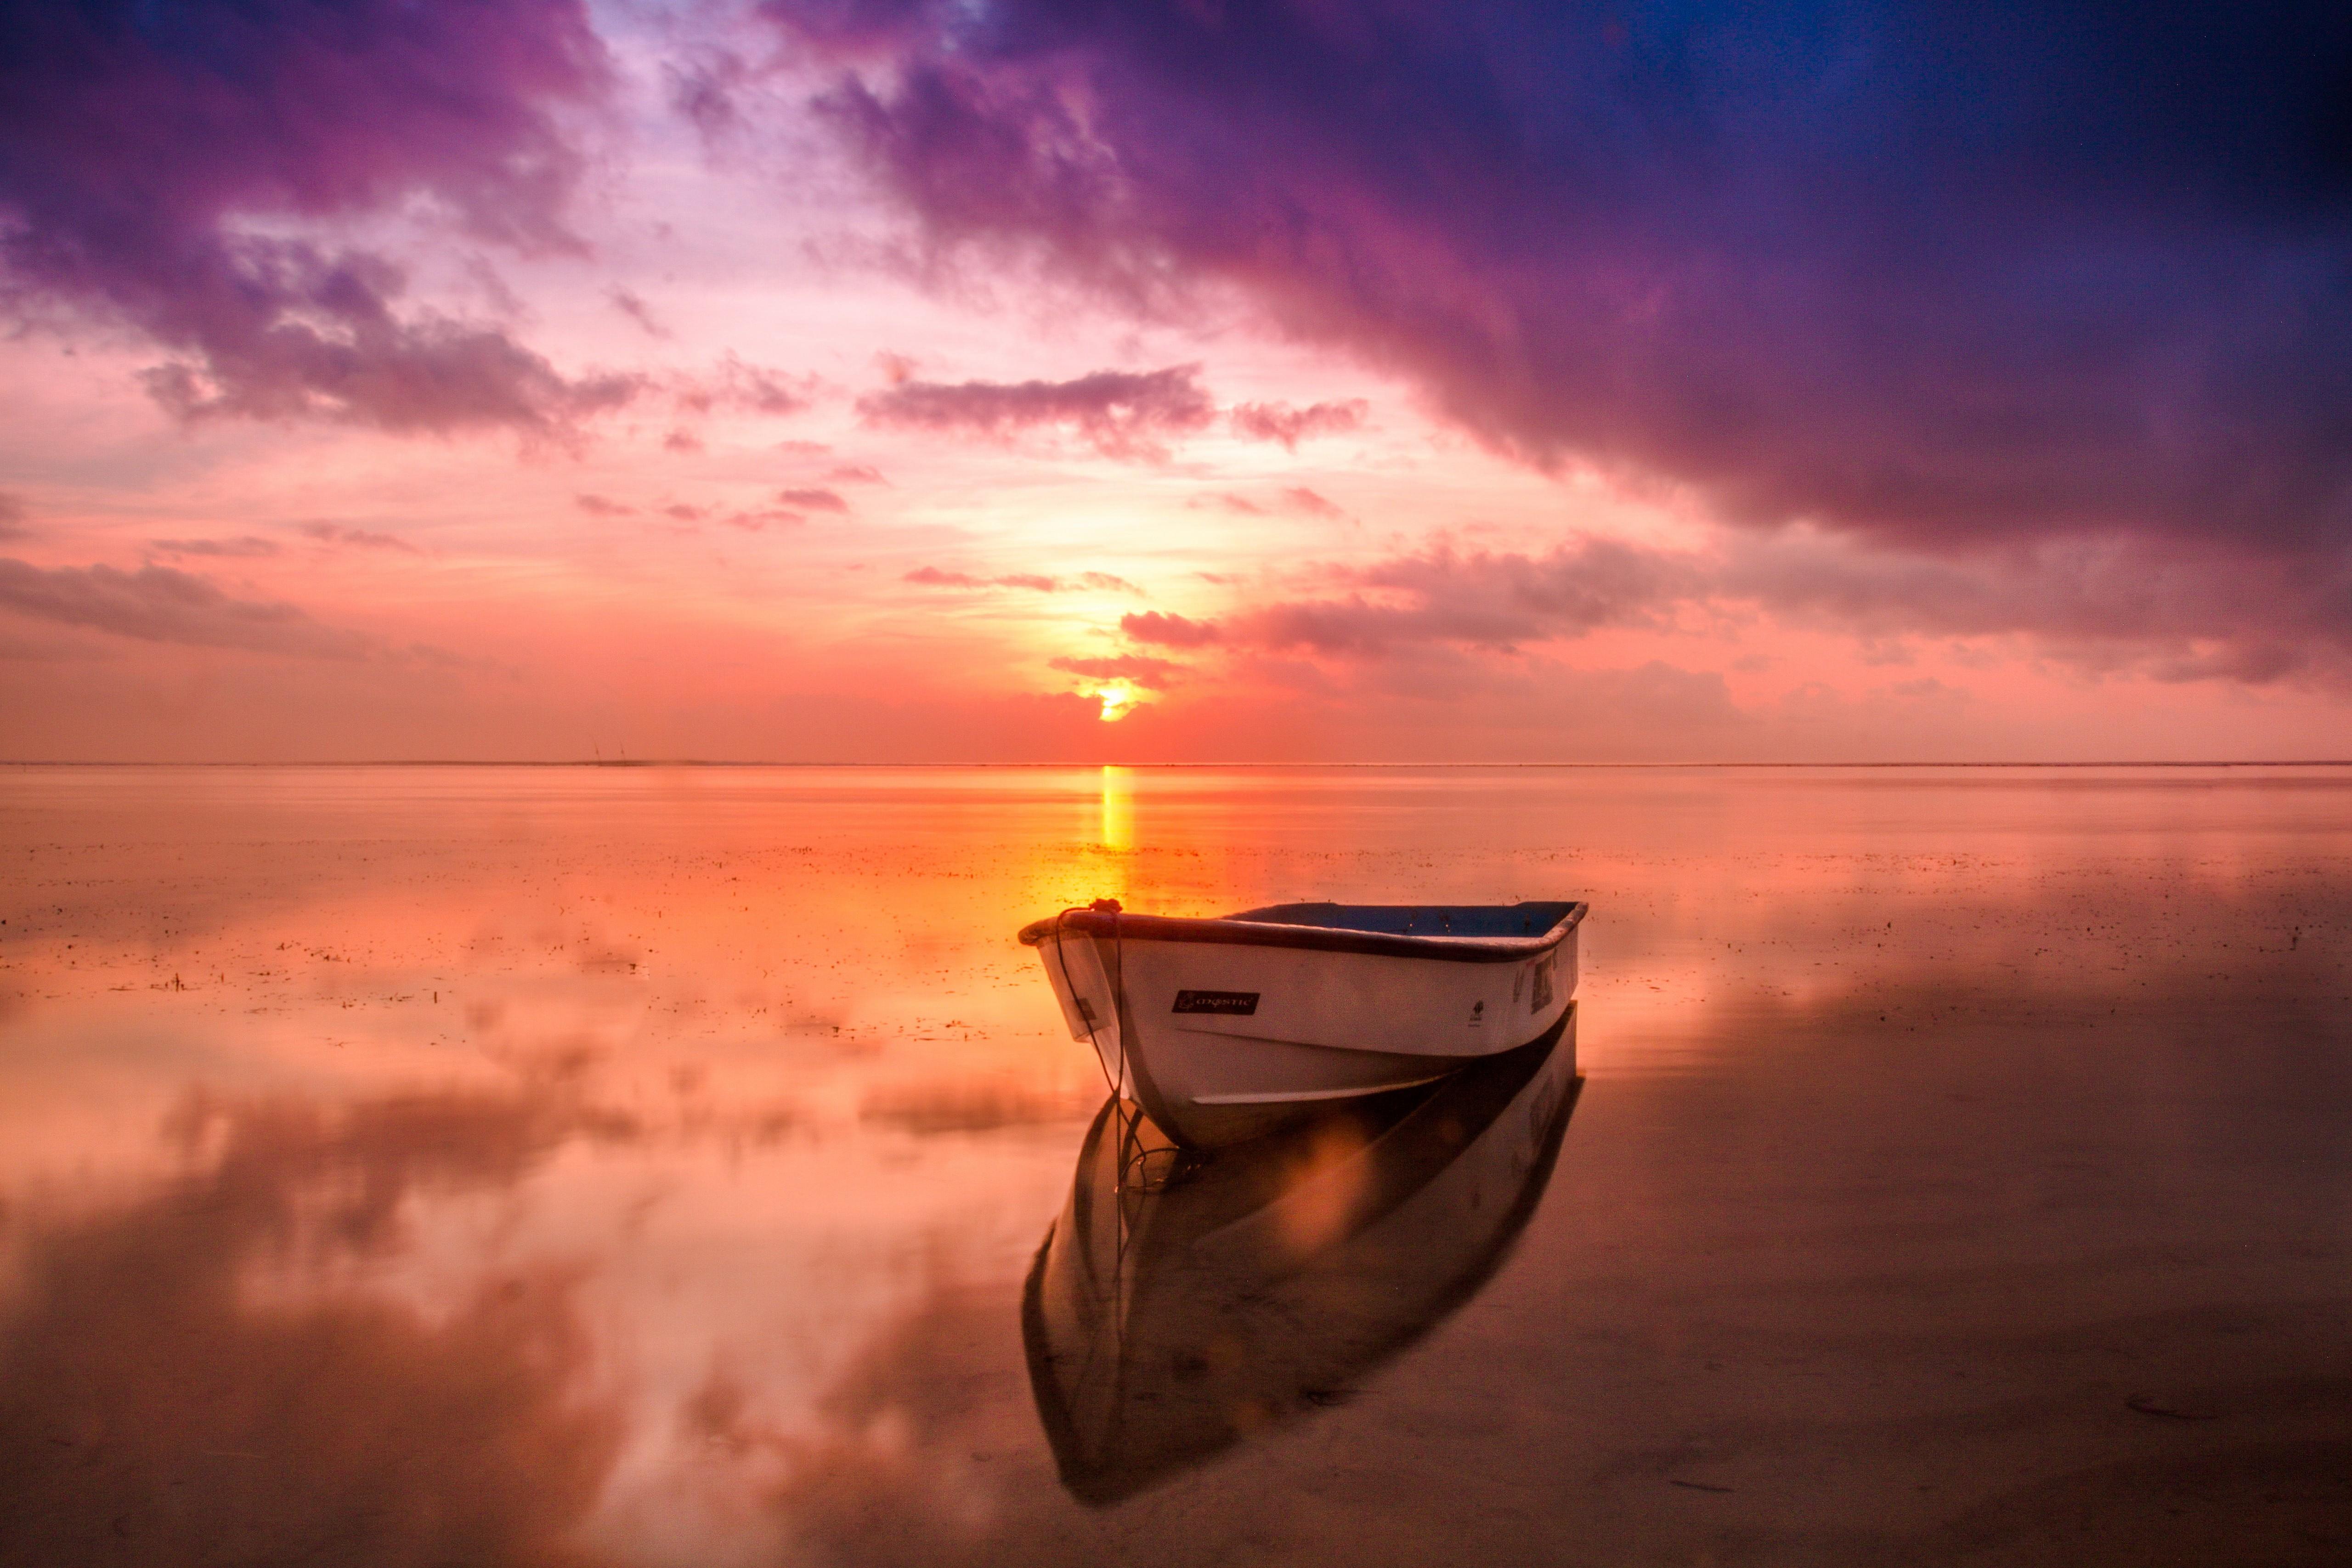 Free photo: Boat at sunset, Solitary, Solitude